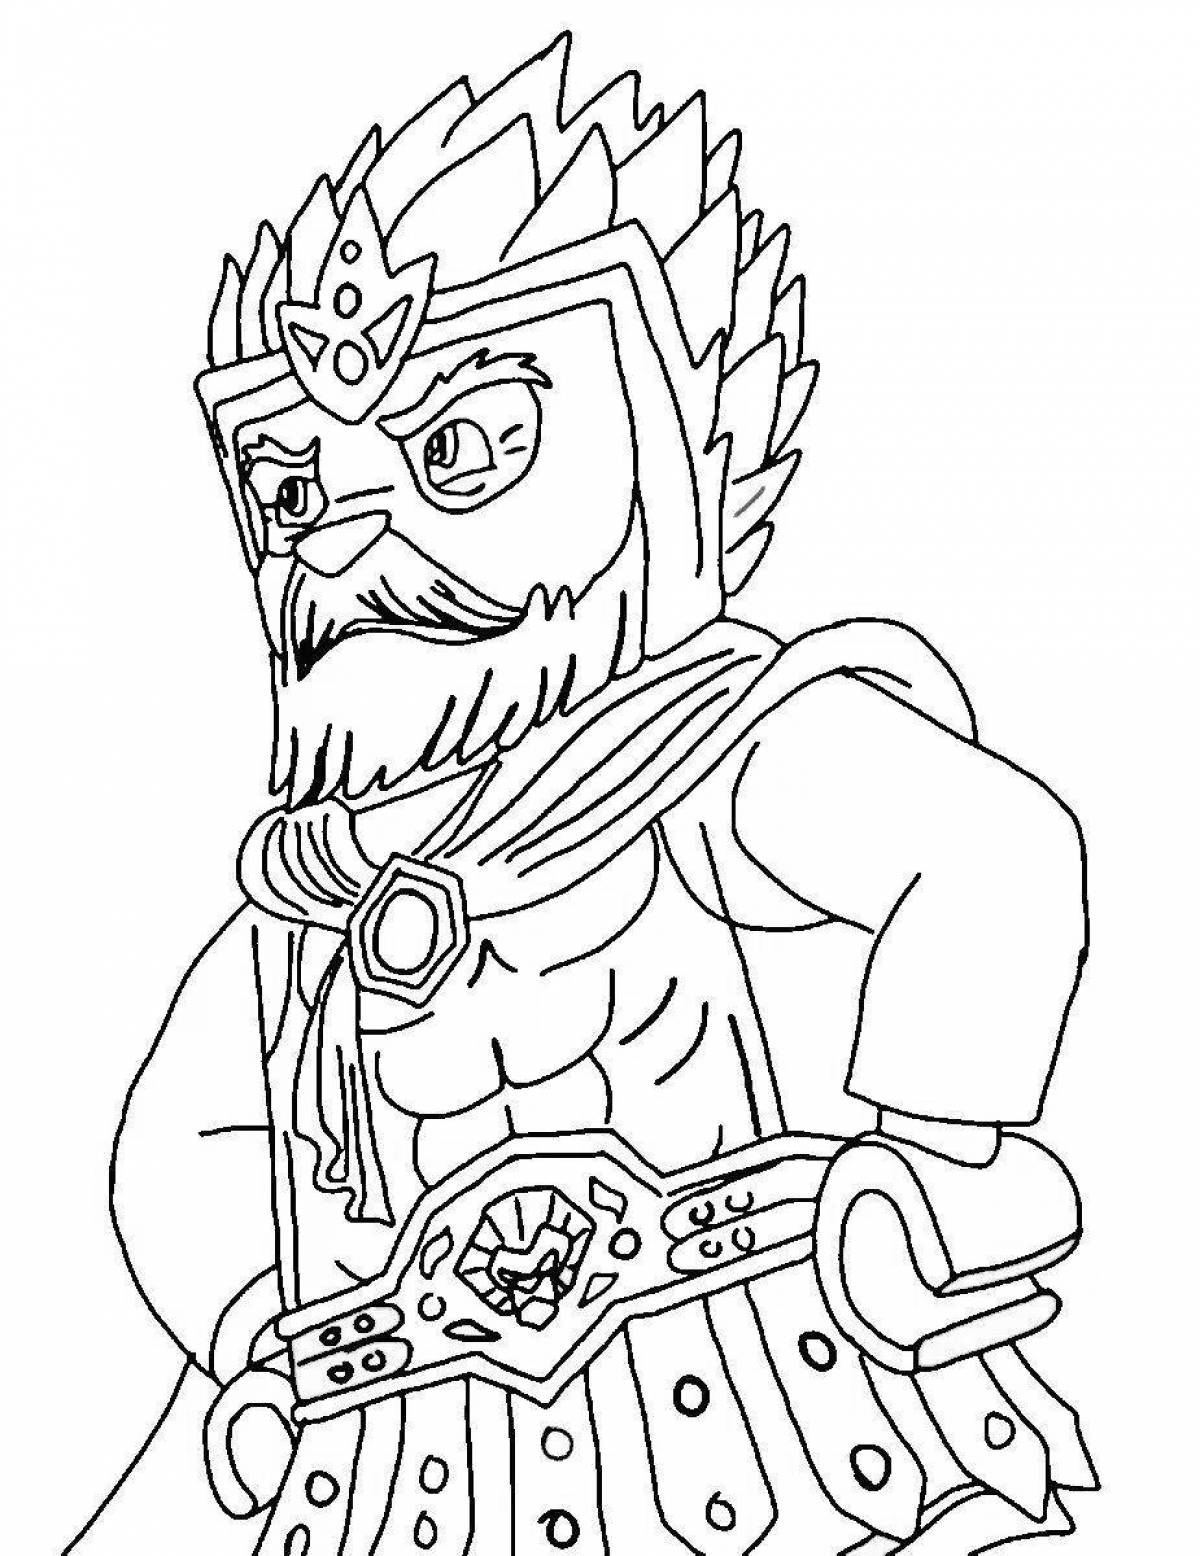 Lovely lego chima coloring page